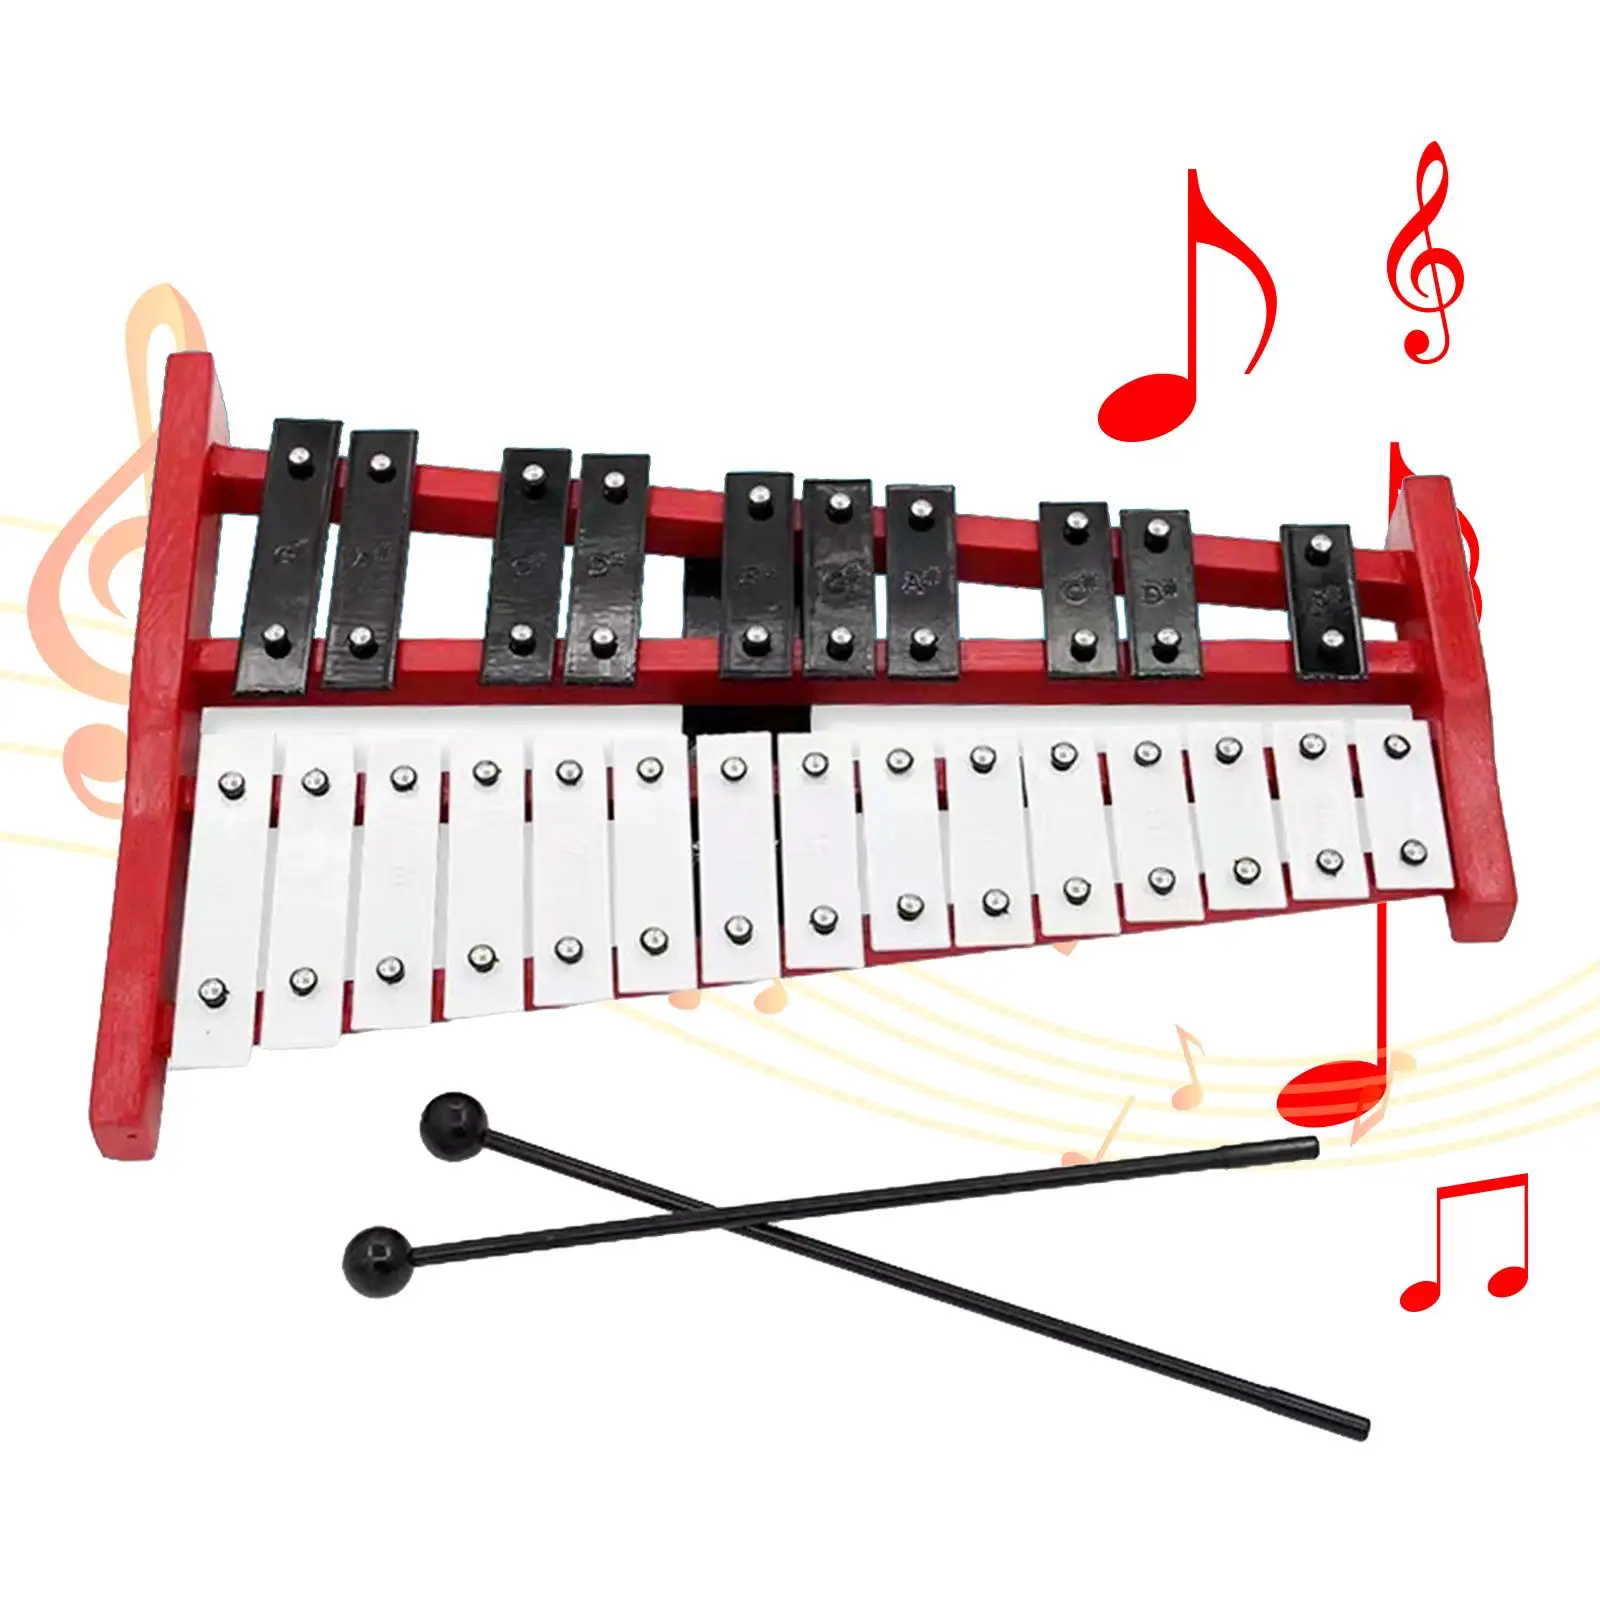 Glockenspiel Xylophone Kids Music Toy Hand Knock Piano Toy for Live Performance Concert School Orchestras Family Sessions